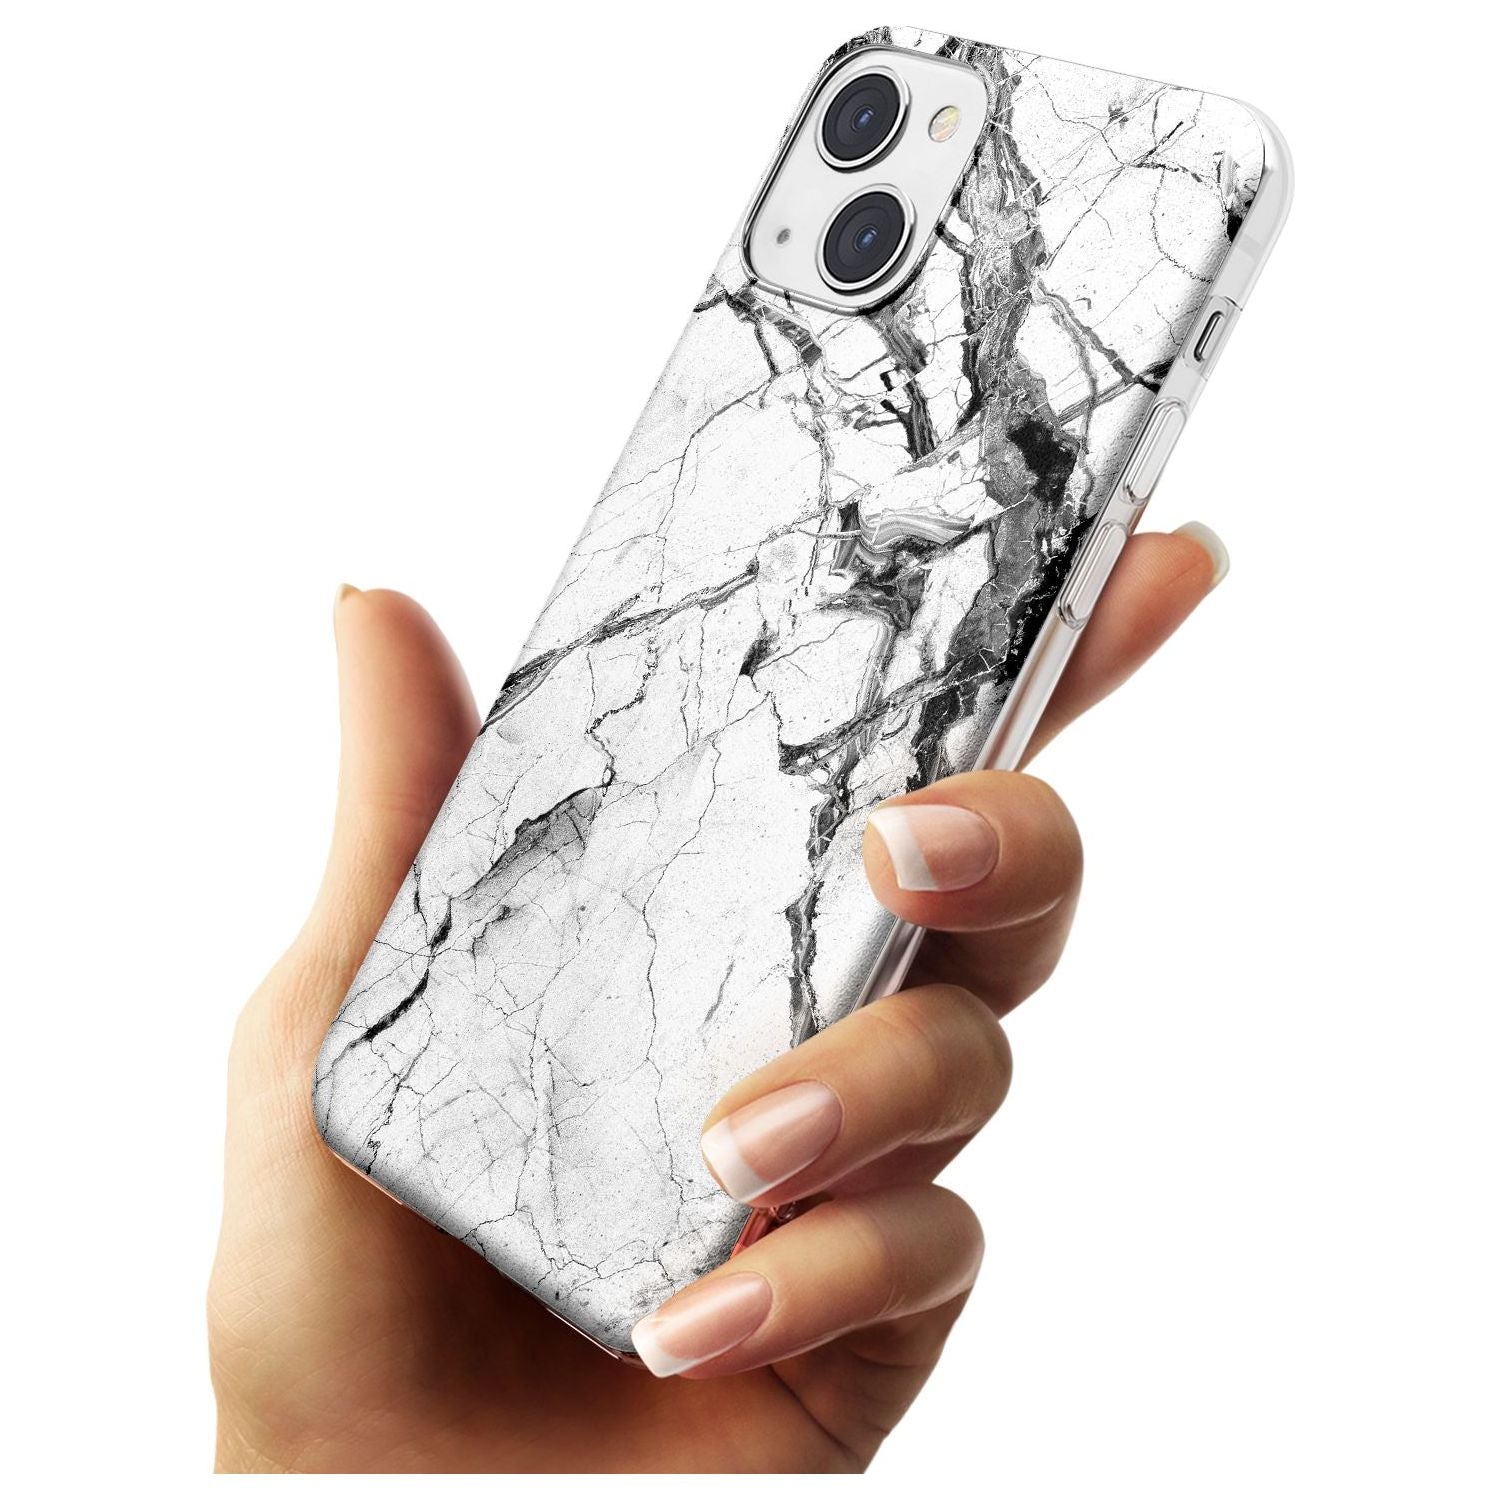 Black & White Stormy Marble Phone Case iPhone 15 Pro Max / Black Impact Case,iPhone 15 Plus / Black Impact Case,iPhone 15 Pro / Black Impact Case,iPhone 15 / Black Impact Case,iPhone 15 Pro Max / Impact Case,iPhone 15 Plus / Impact Case,iPhone 15 Pro / Impact Case,iPhone 15 / Impact Case,iPhone 15 Pro Max / Magsafe Black Impact Case,iPhone 15 Plus / Magsafe Black Impact Case,iPhone 15 Pro / Magsafe Black Impact Case,iPhone 15 / Magsafe Black Impact Case,iPhone 14 Pro Max / Black Impact Case,iPhone 14 Plus /